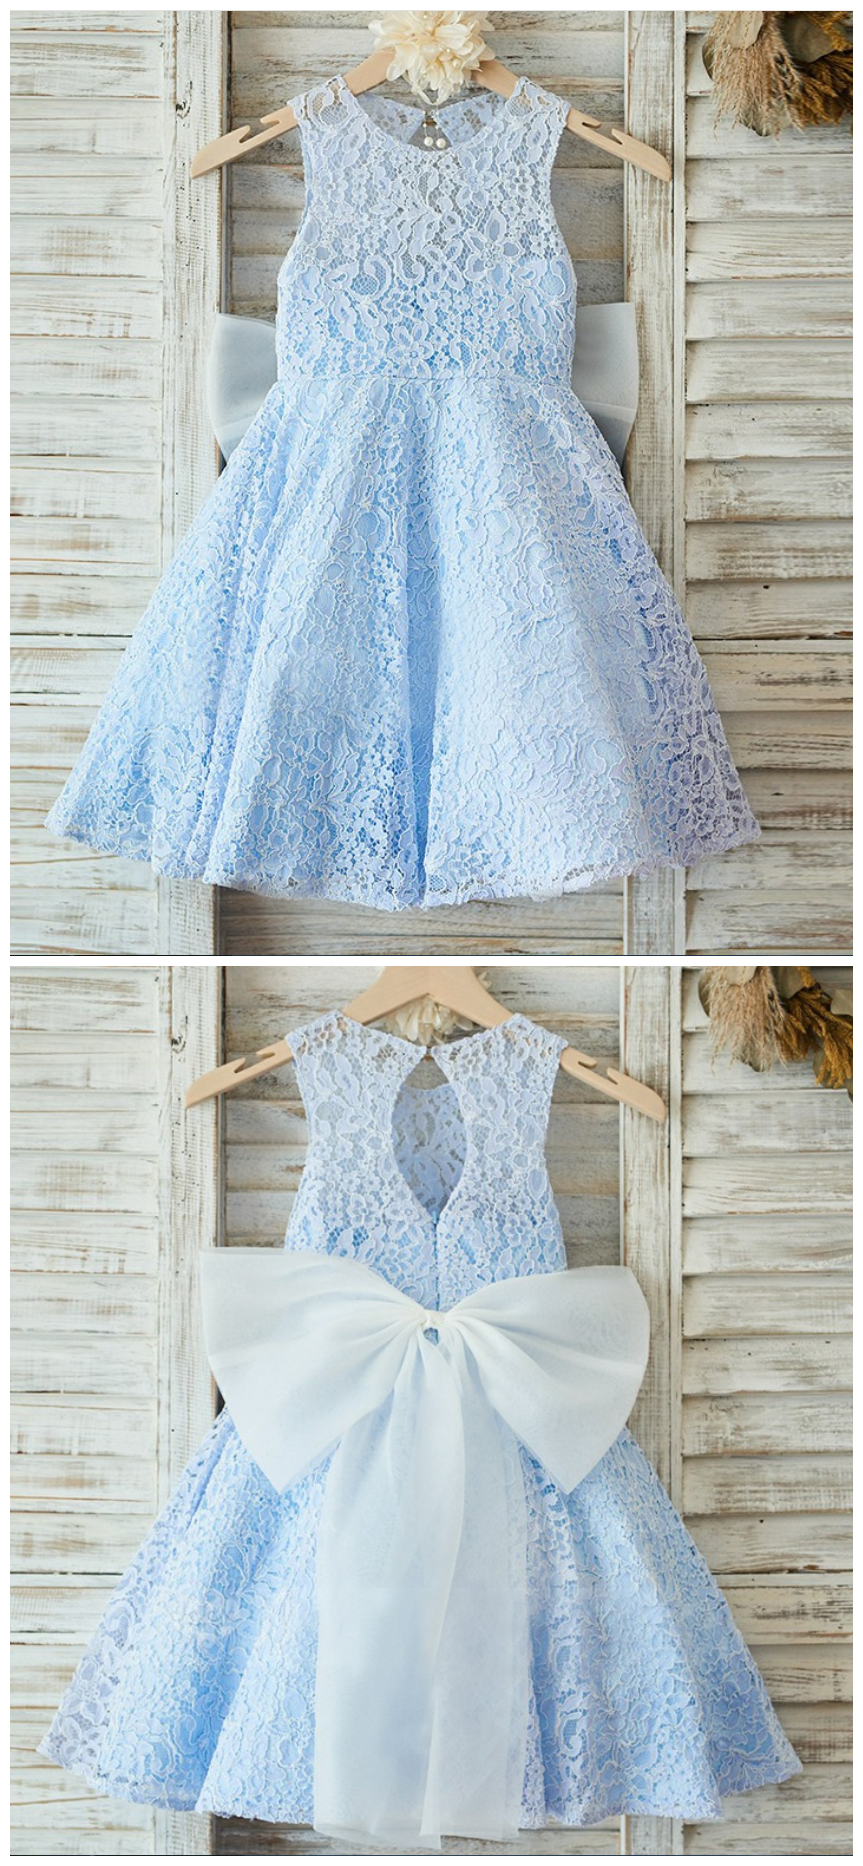 Flower Girl Dresses Lace Appliques Toddler Infant Tea Length Kids Birthday Christmas Dress Girls Wedding Party Gowns